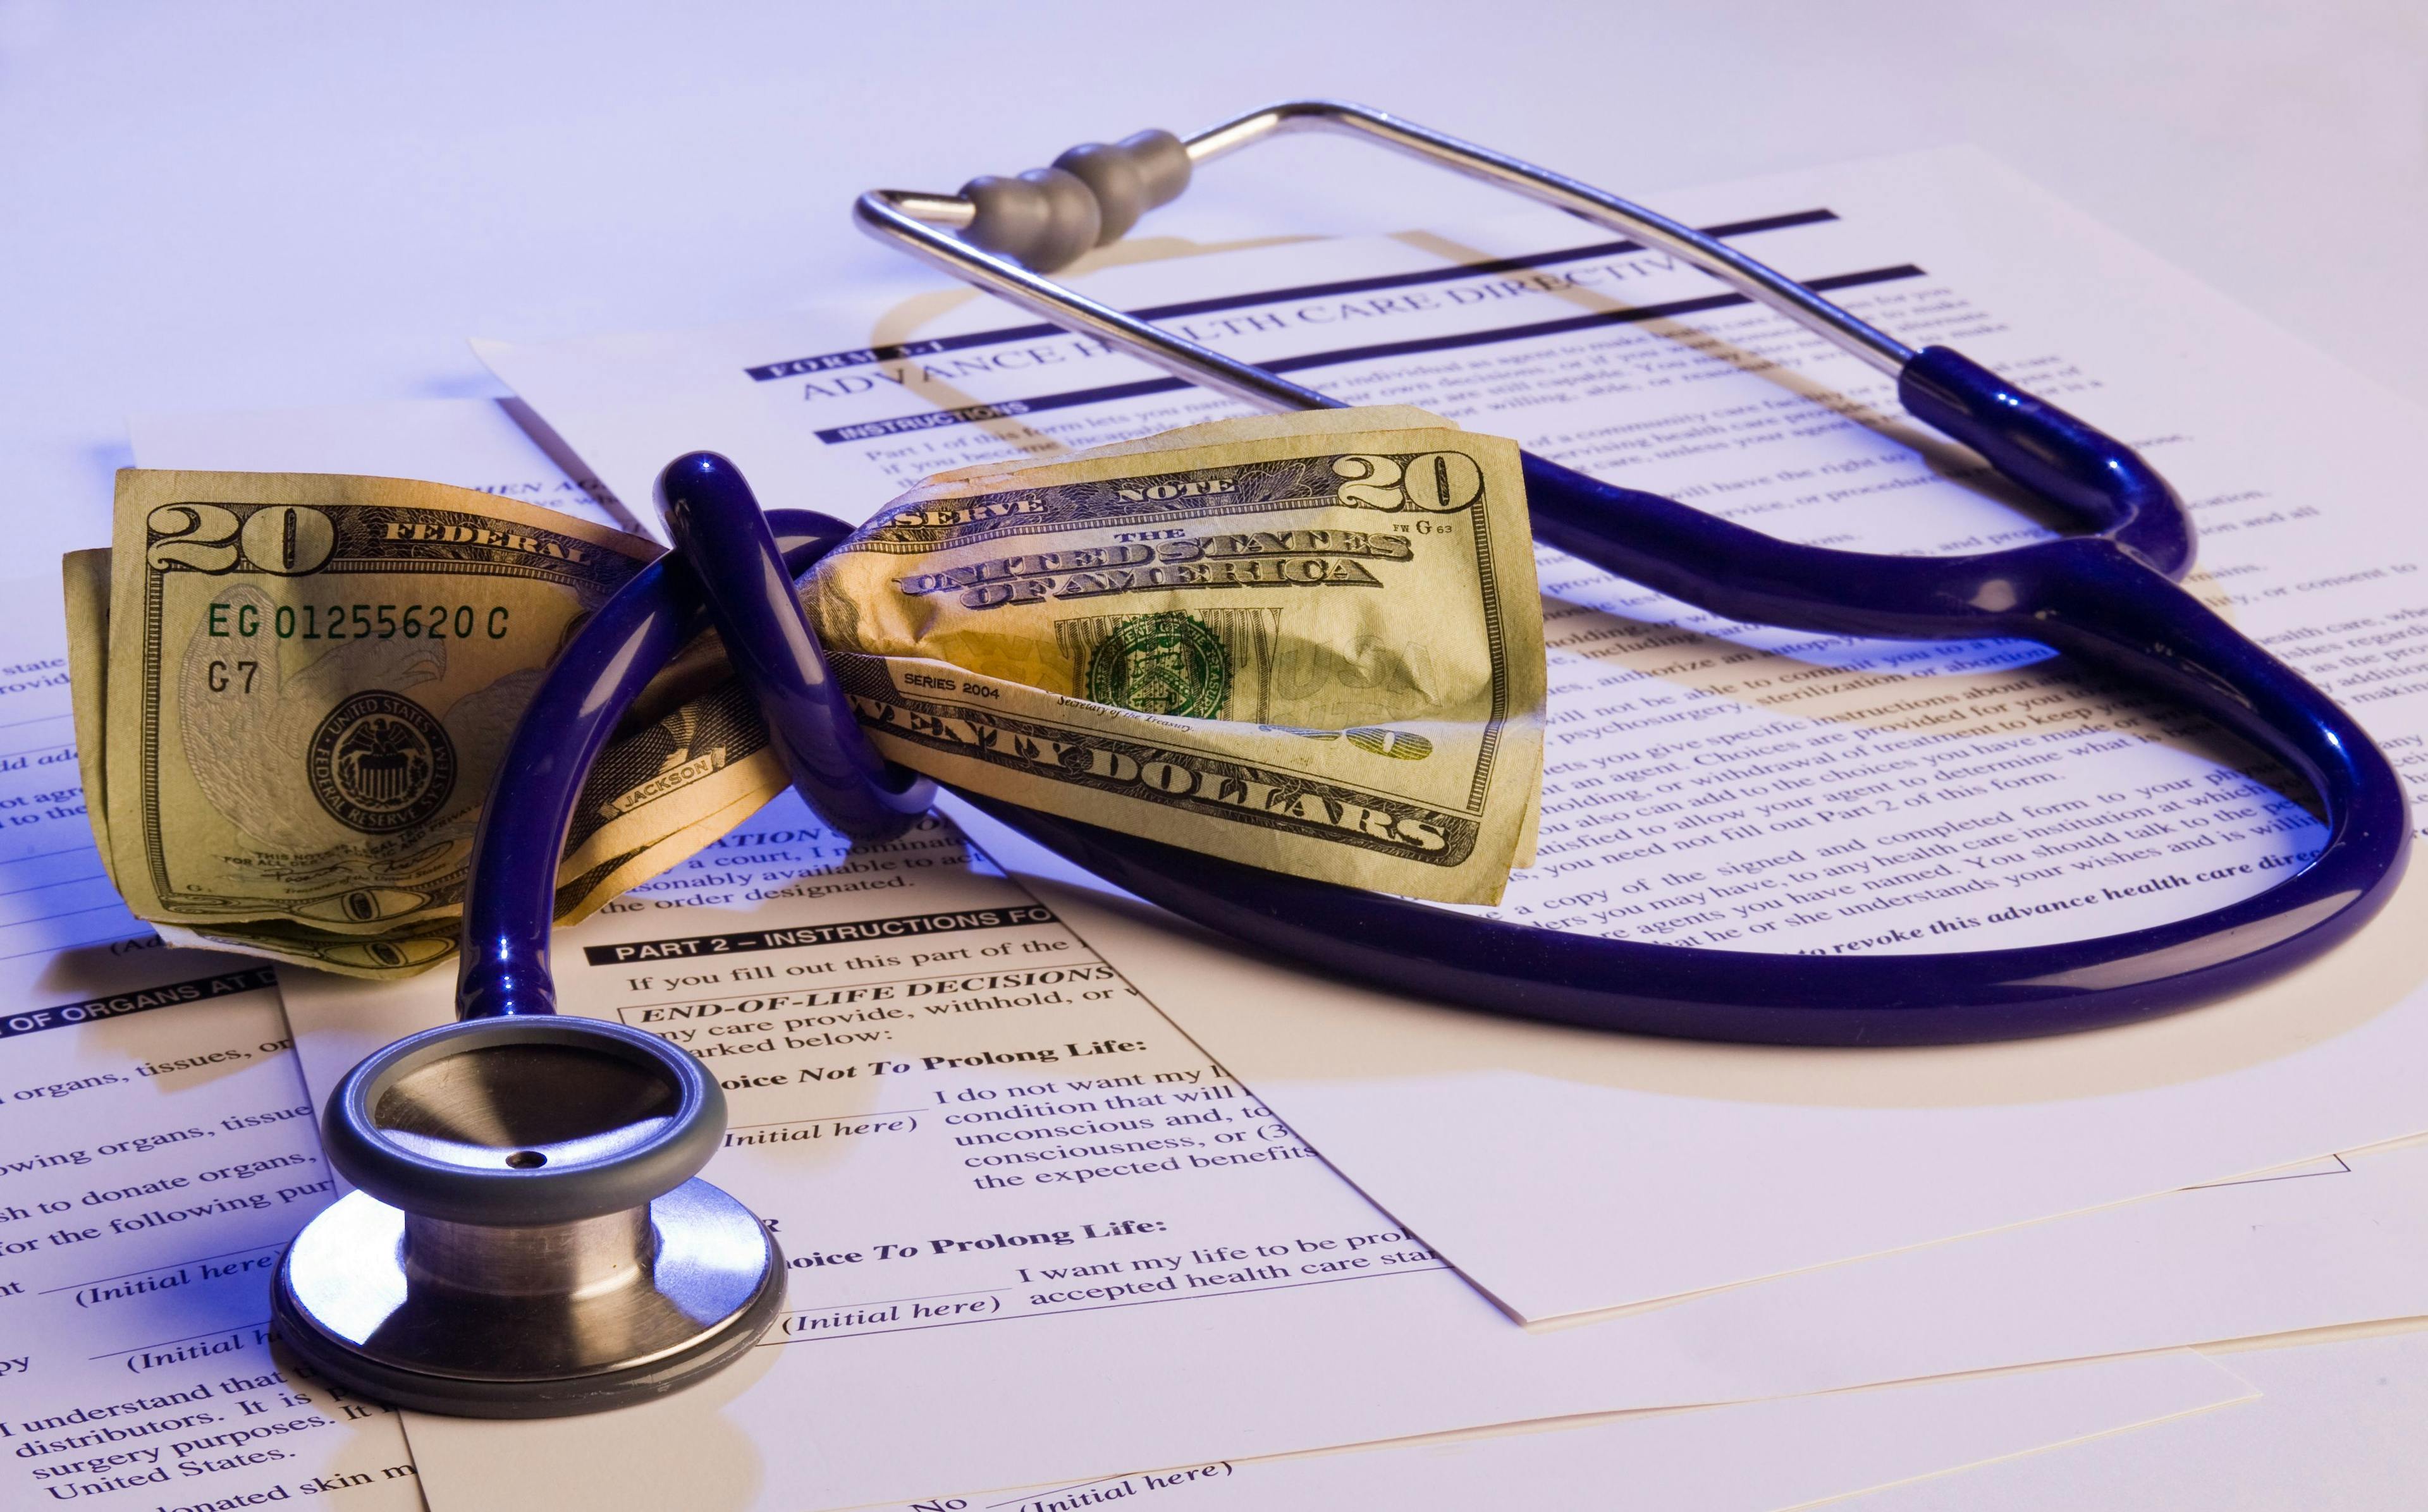 stethoscope wrapped around money with medical papers, money tied up in health care, medical expenses